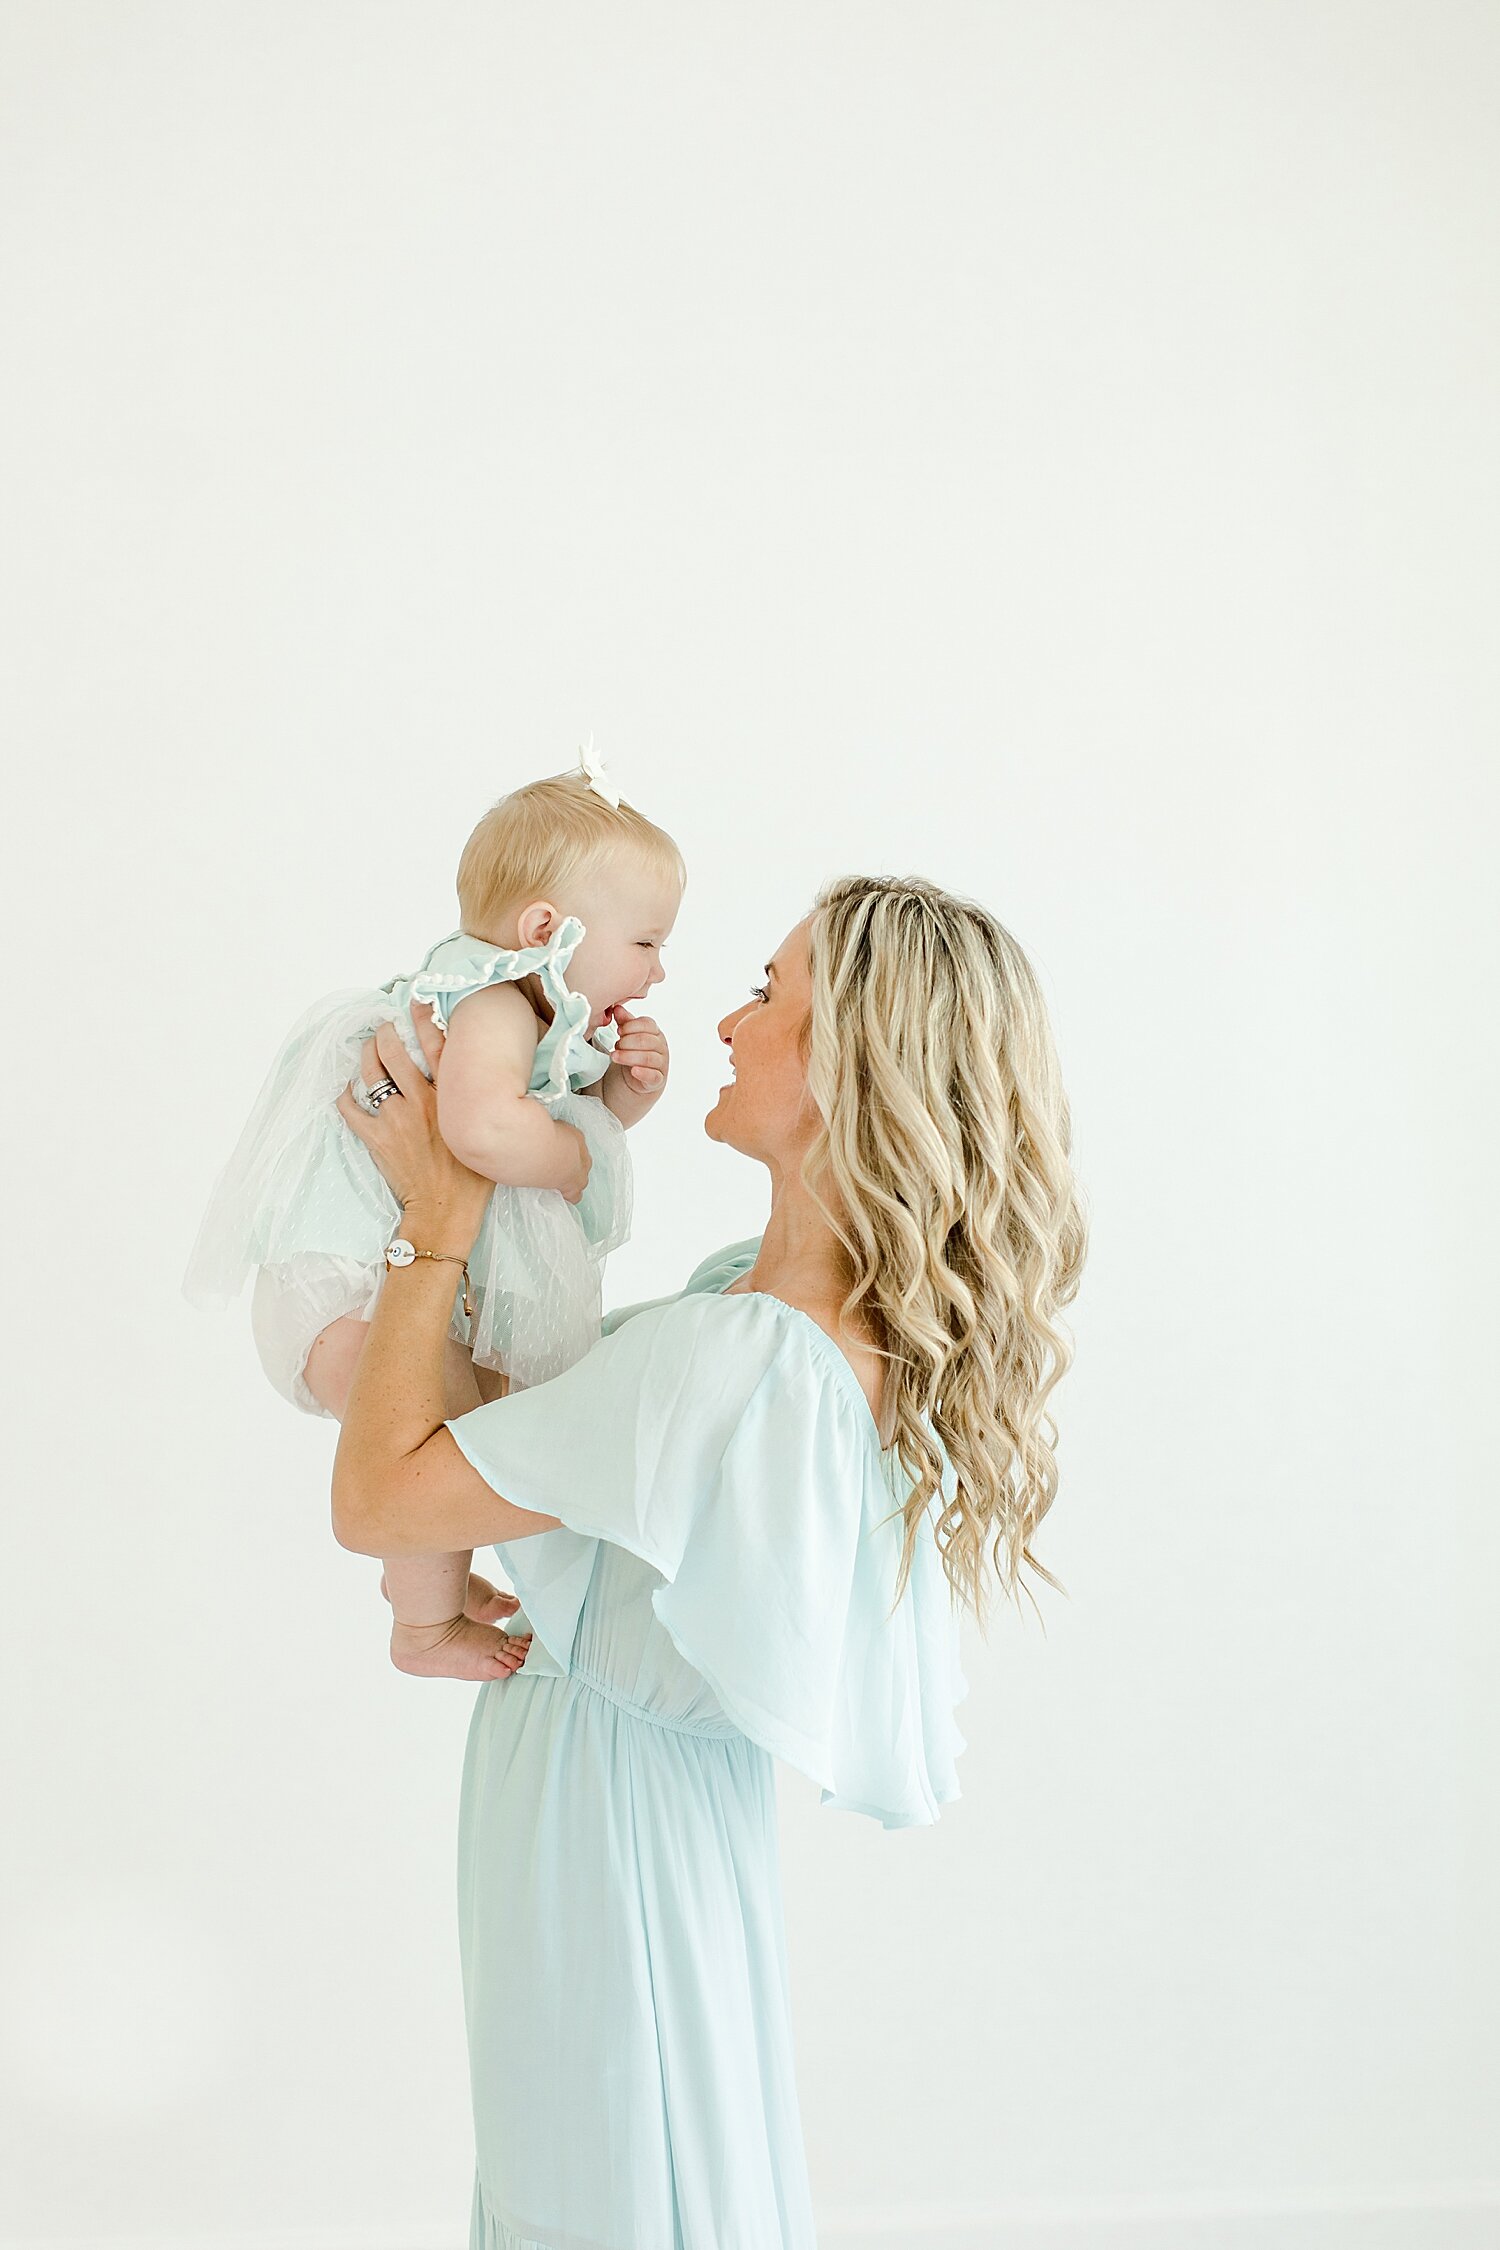 Mom holding up her baby girl for mommy and me session. Photos by Kristin Wood Phtoography.